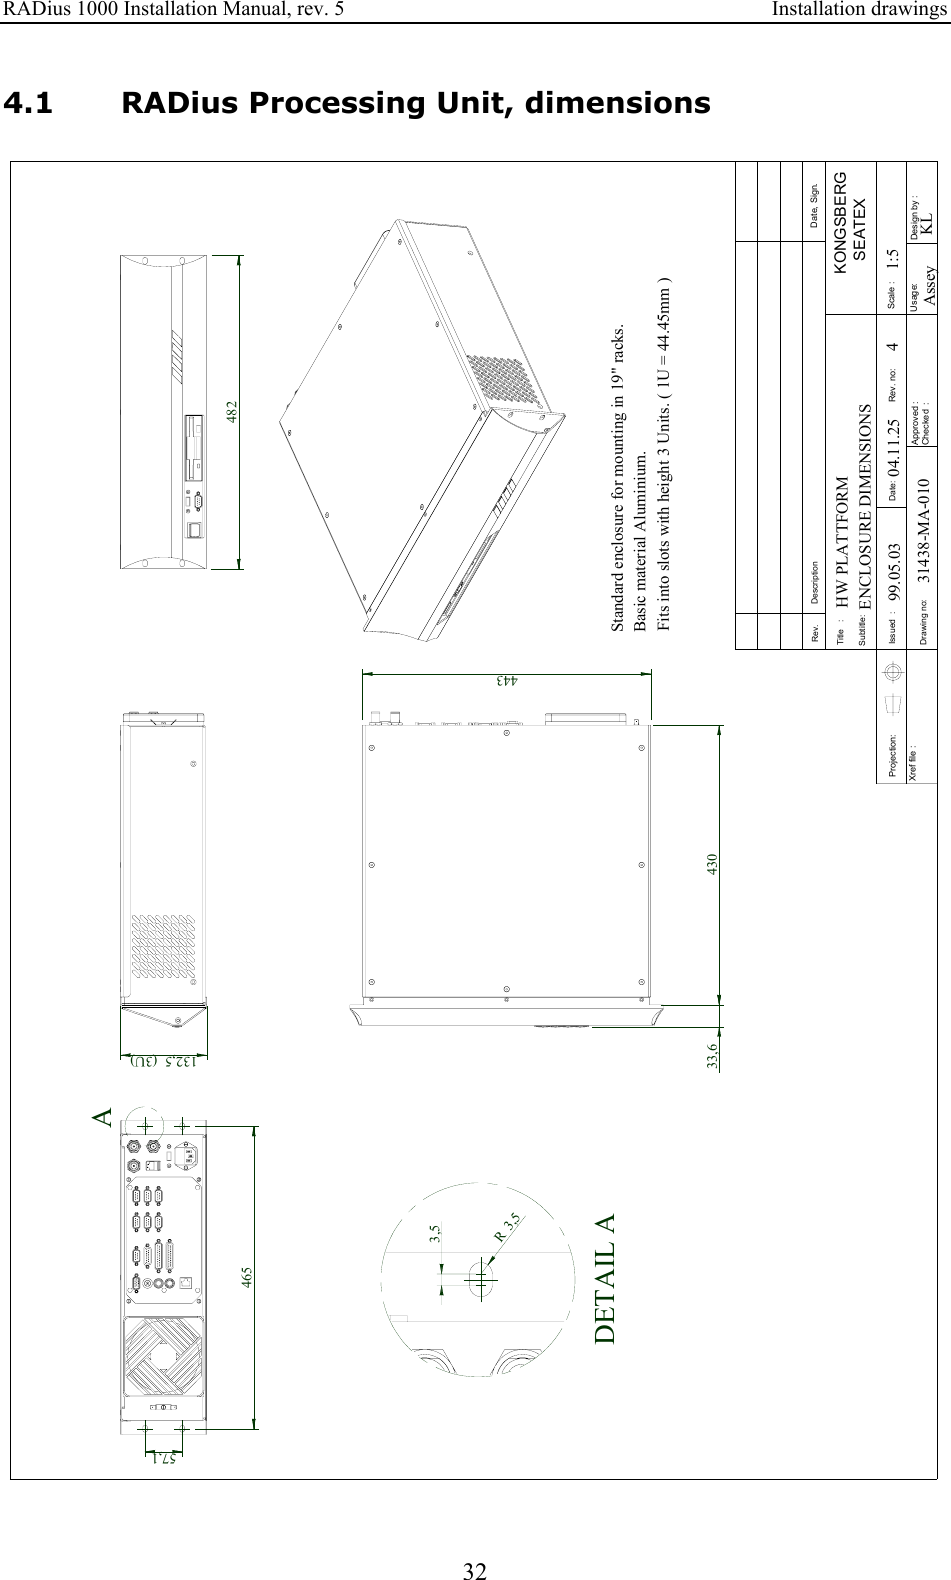 RADius 1000 Installation Manual, rev. 5    Installation drawings 32 4.1 RADius Processing Unit, dimensions Approved :Checked  :Subtitle:Title   :Issued  :Drawing no:Xref file : Projection:Rev. DescriptionDate:Date, Sign.Design by :Usage:Rev. no: Scale :31438-MA-010HW PLATTFORM1:5KL99.05.03 04.11.25 4Standard enclosure for mounting in 19&quot; racks.Basic material Aluminium.Fits into slots with height 3 Units. ( 1U = 44.45mm ) ENCLOSURE DIMENSIONSKONGSBERG   SEATEXAssey44343033,646557,1132,5 (3U)482DETAIL A3,5R3,5A  